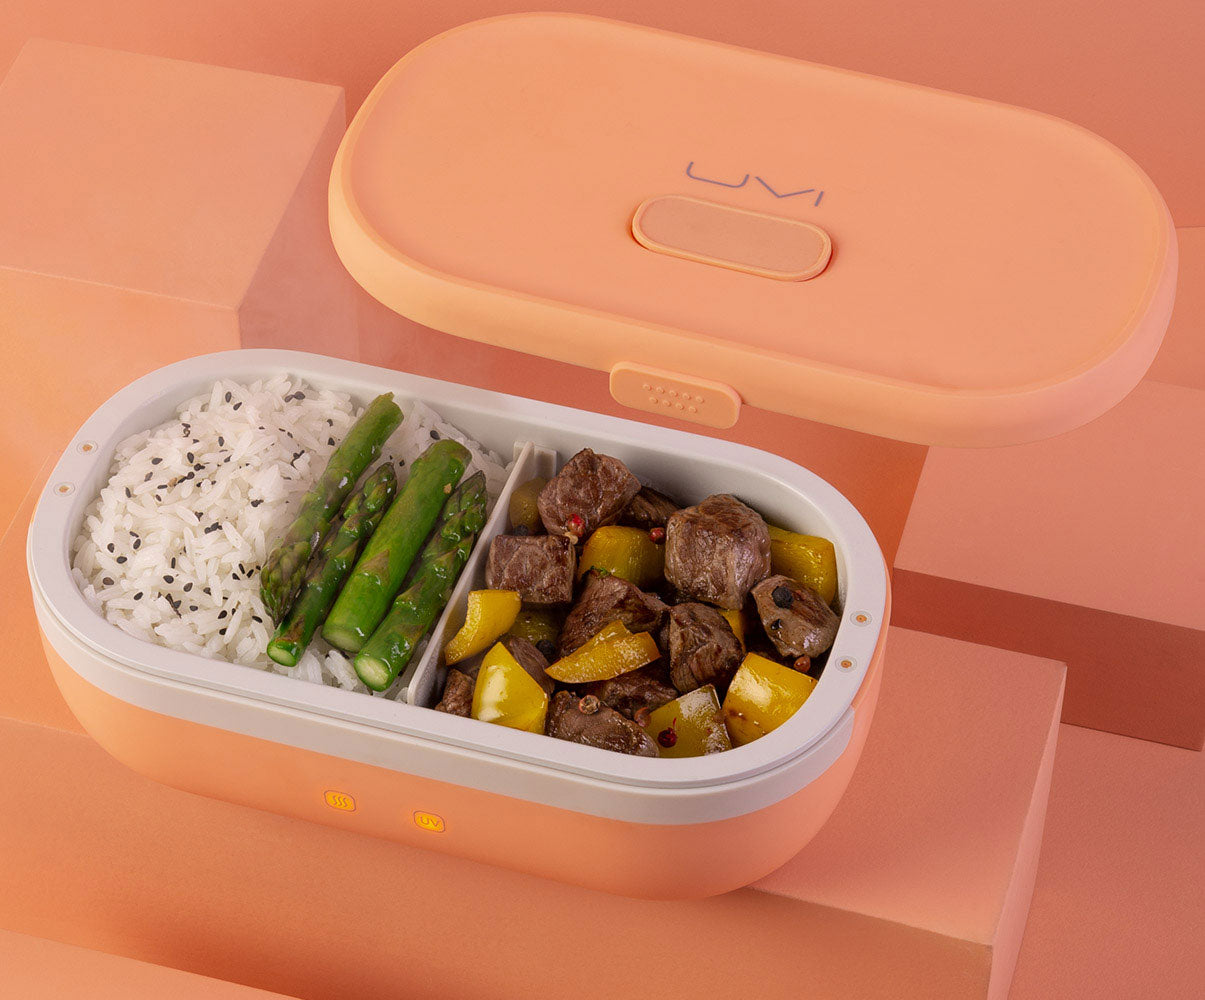 Hot Bento: The Self-Heating Lunch Box 